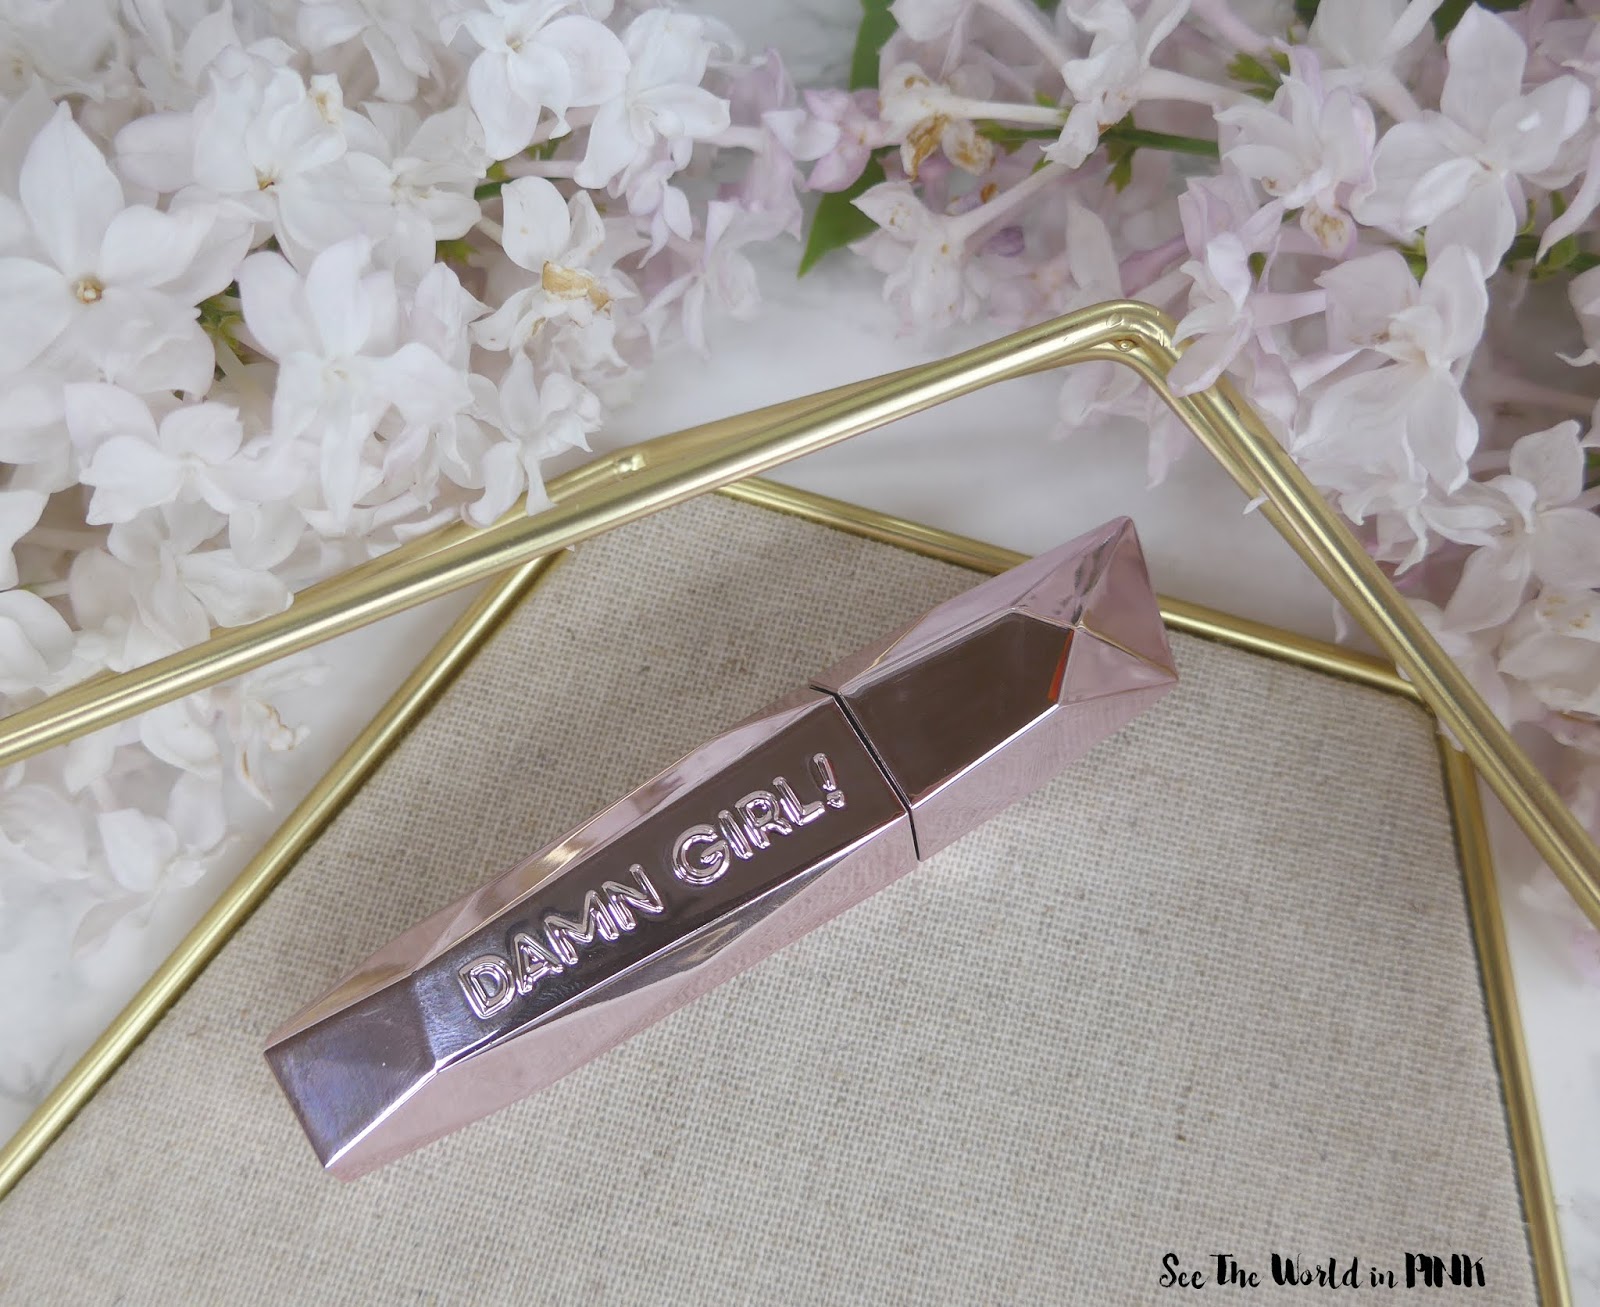 Too Faced Damn Girl! 24 Hour Mascara - Review and Try-on! 